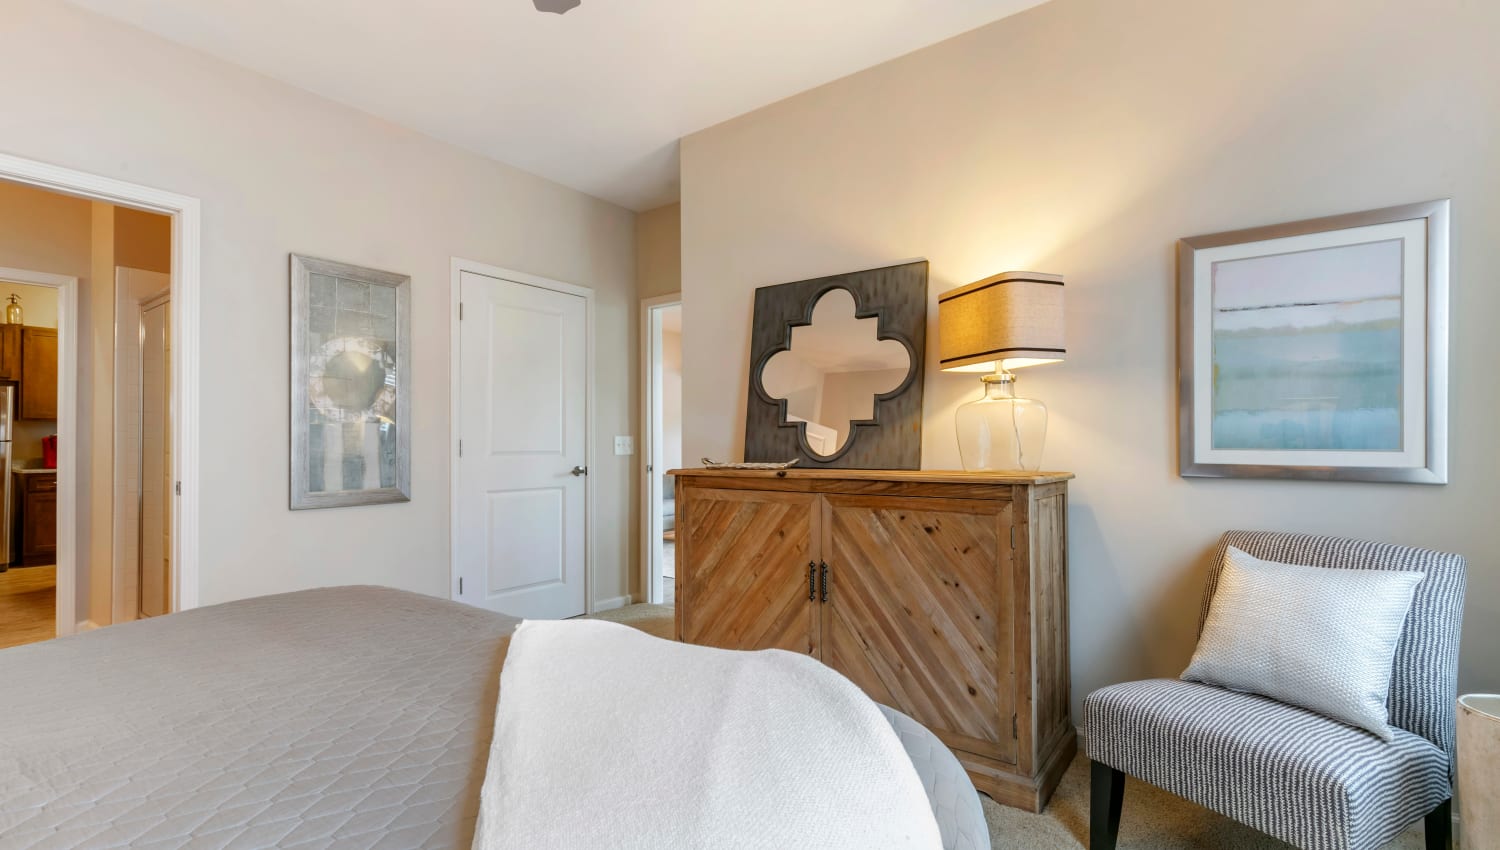 Model bedroom with a ceiling fan at The Village at Apison Pike in Ooltewah, Tennessee